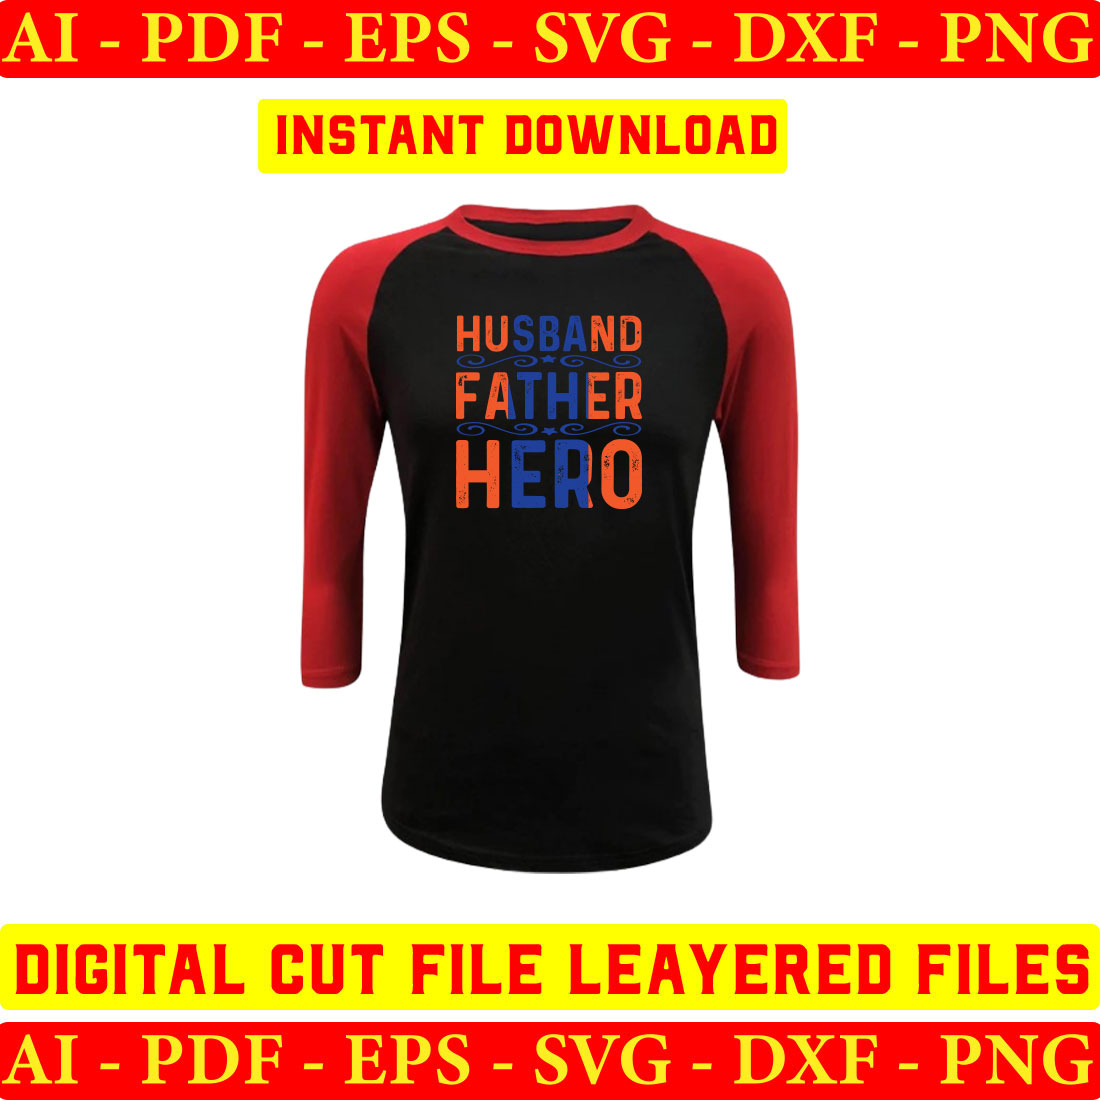 Black and red shirt with the words husband and father hero on it.